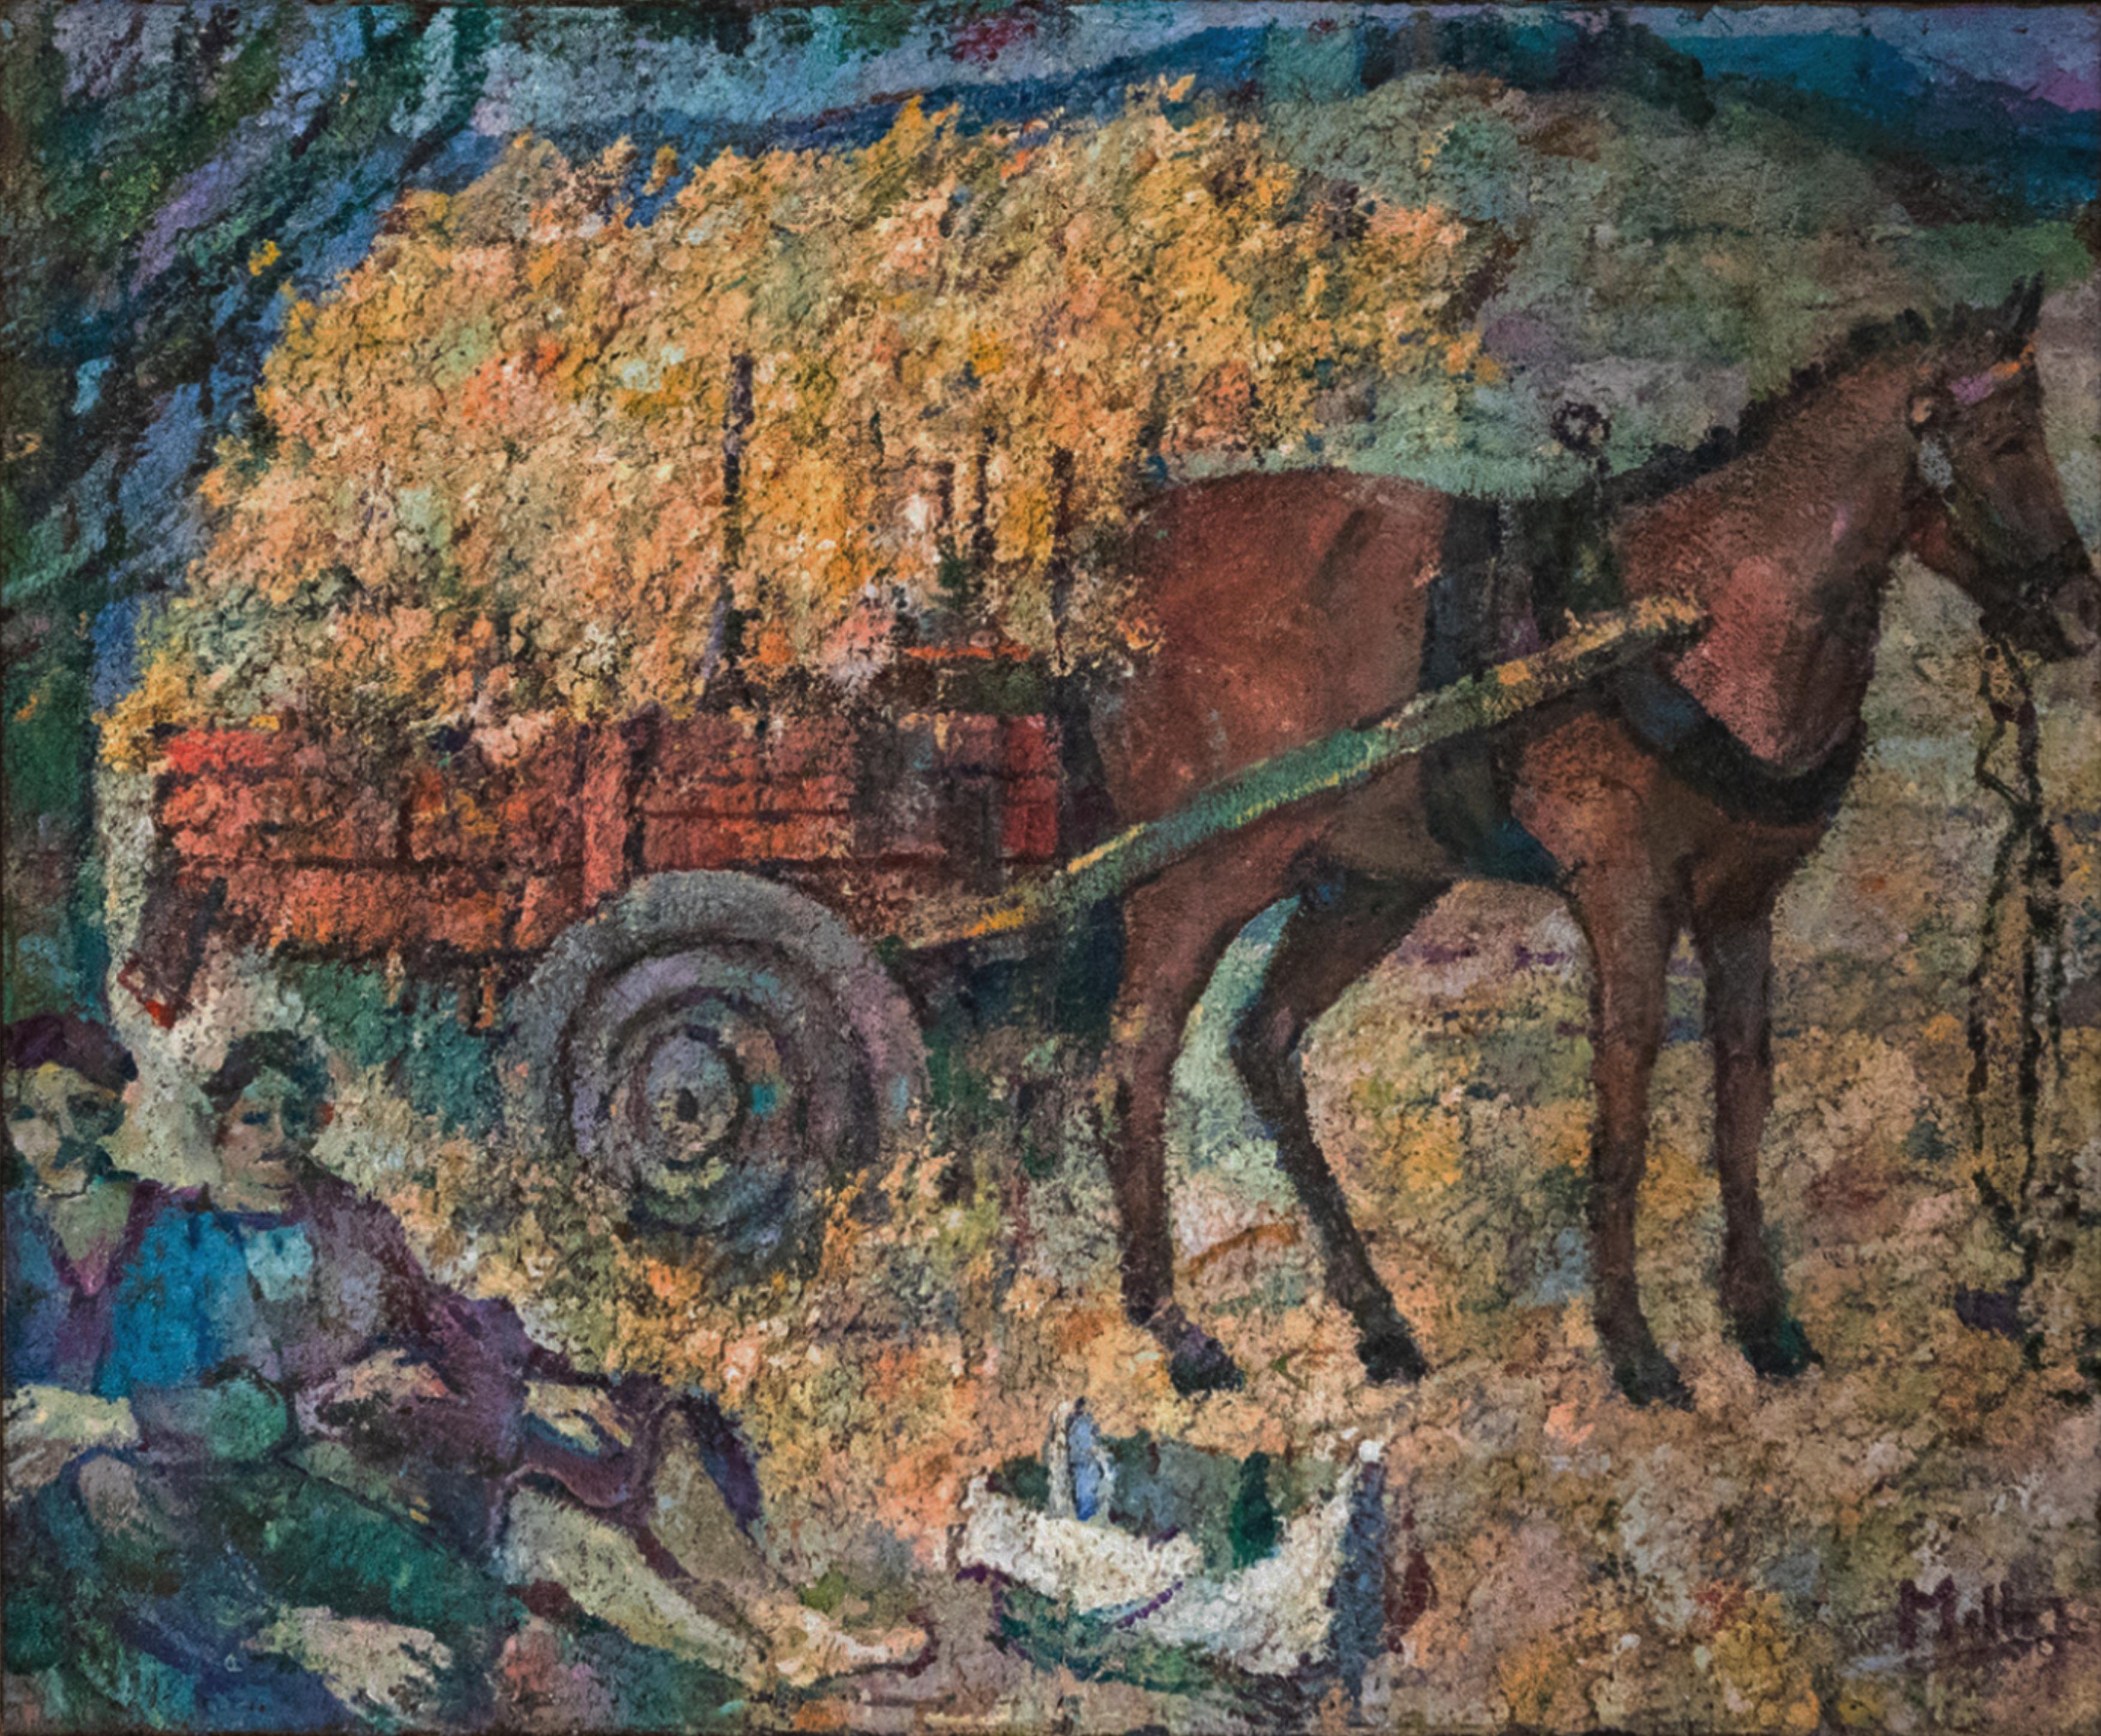 A pointillist-style painting of a peaceful countryside scene featuring a wagon filled with hay, signed by the Portuguese modernist painter Agostinho de Mello Júnior, also known as Mello Junior.

Agostinho de Mello Júnior (1914 to 2002) hailed from